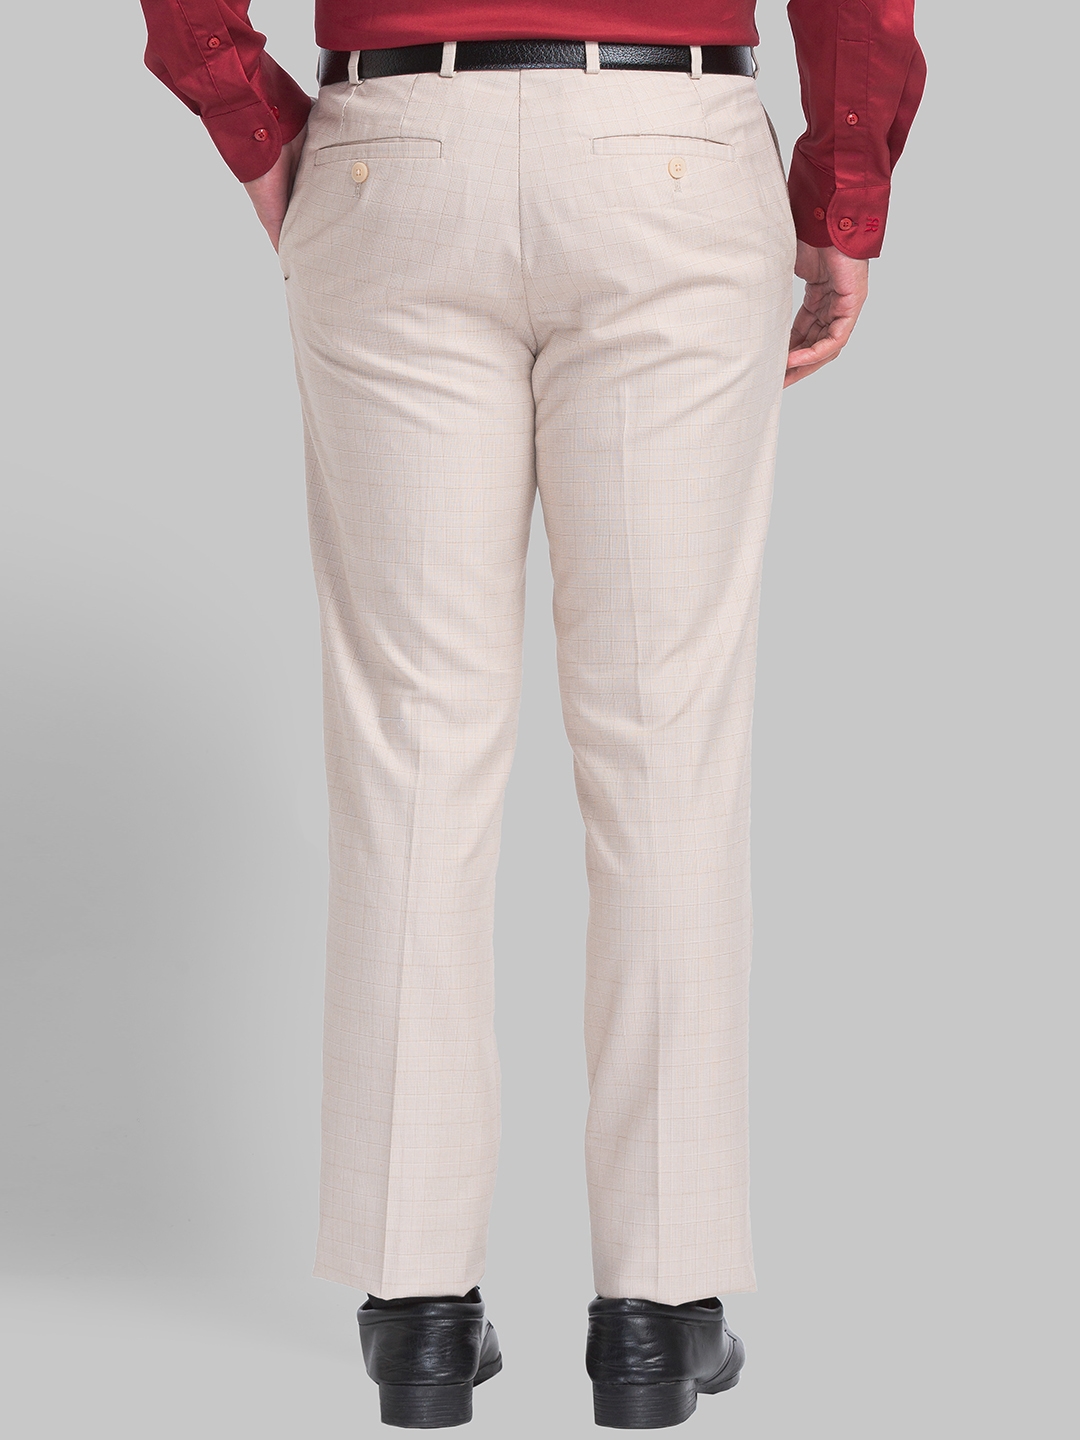 Buy Raymond Men Solid Regular Fit Formal Trouser - White Online at Low  Prices in India - Paytmmall.com